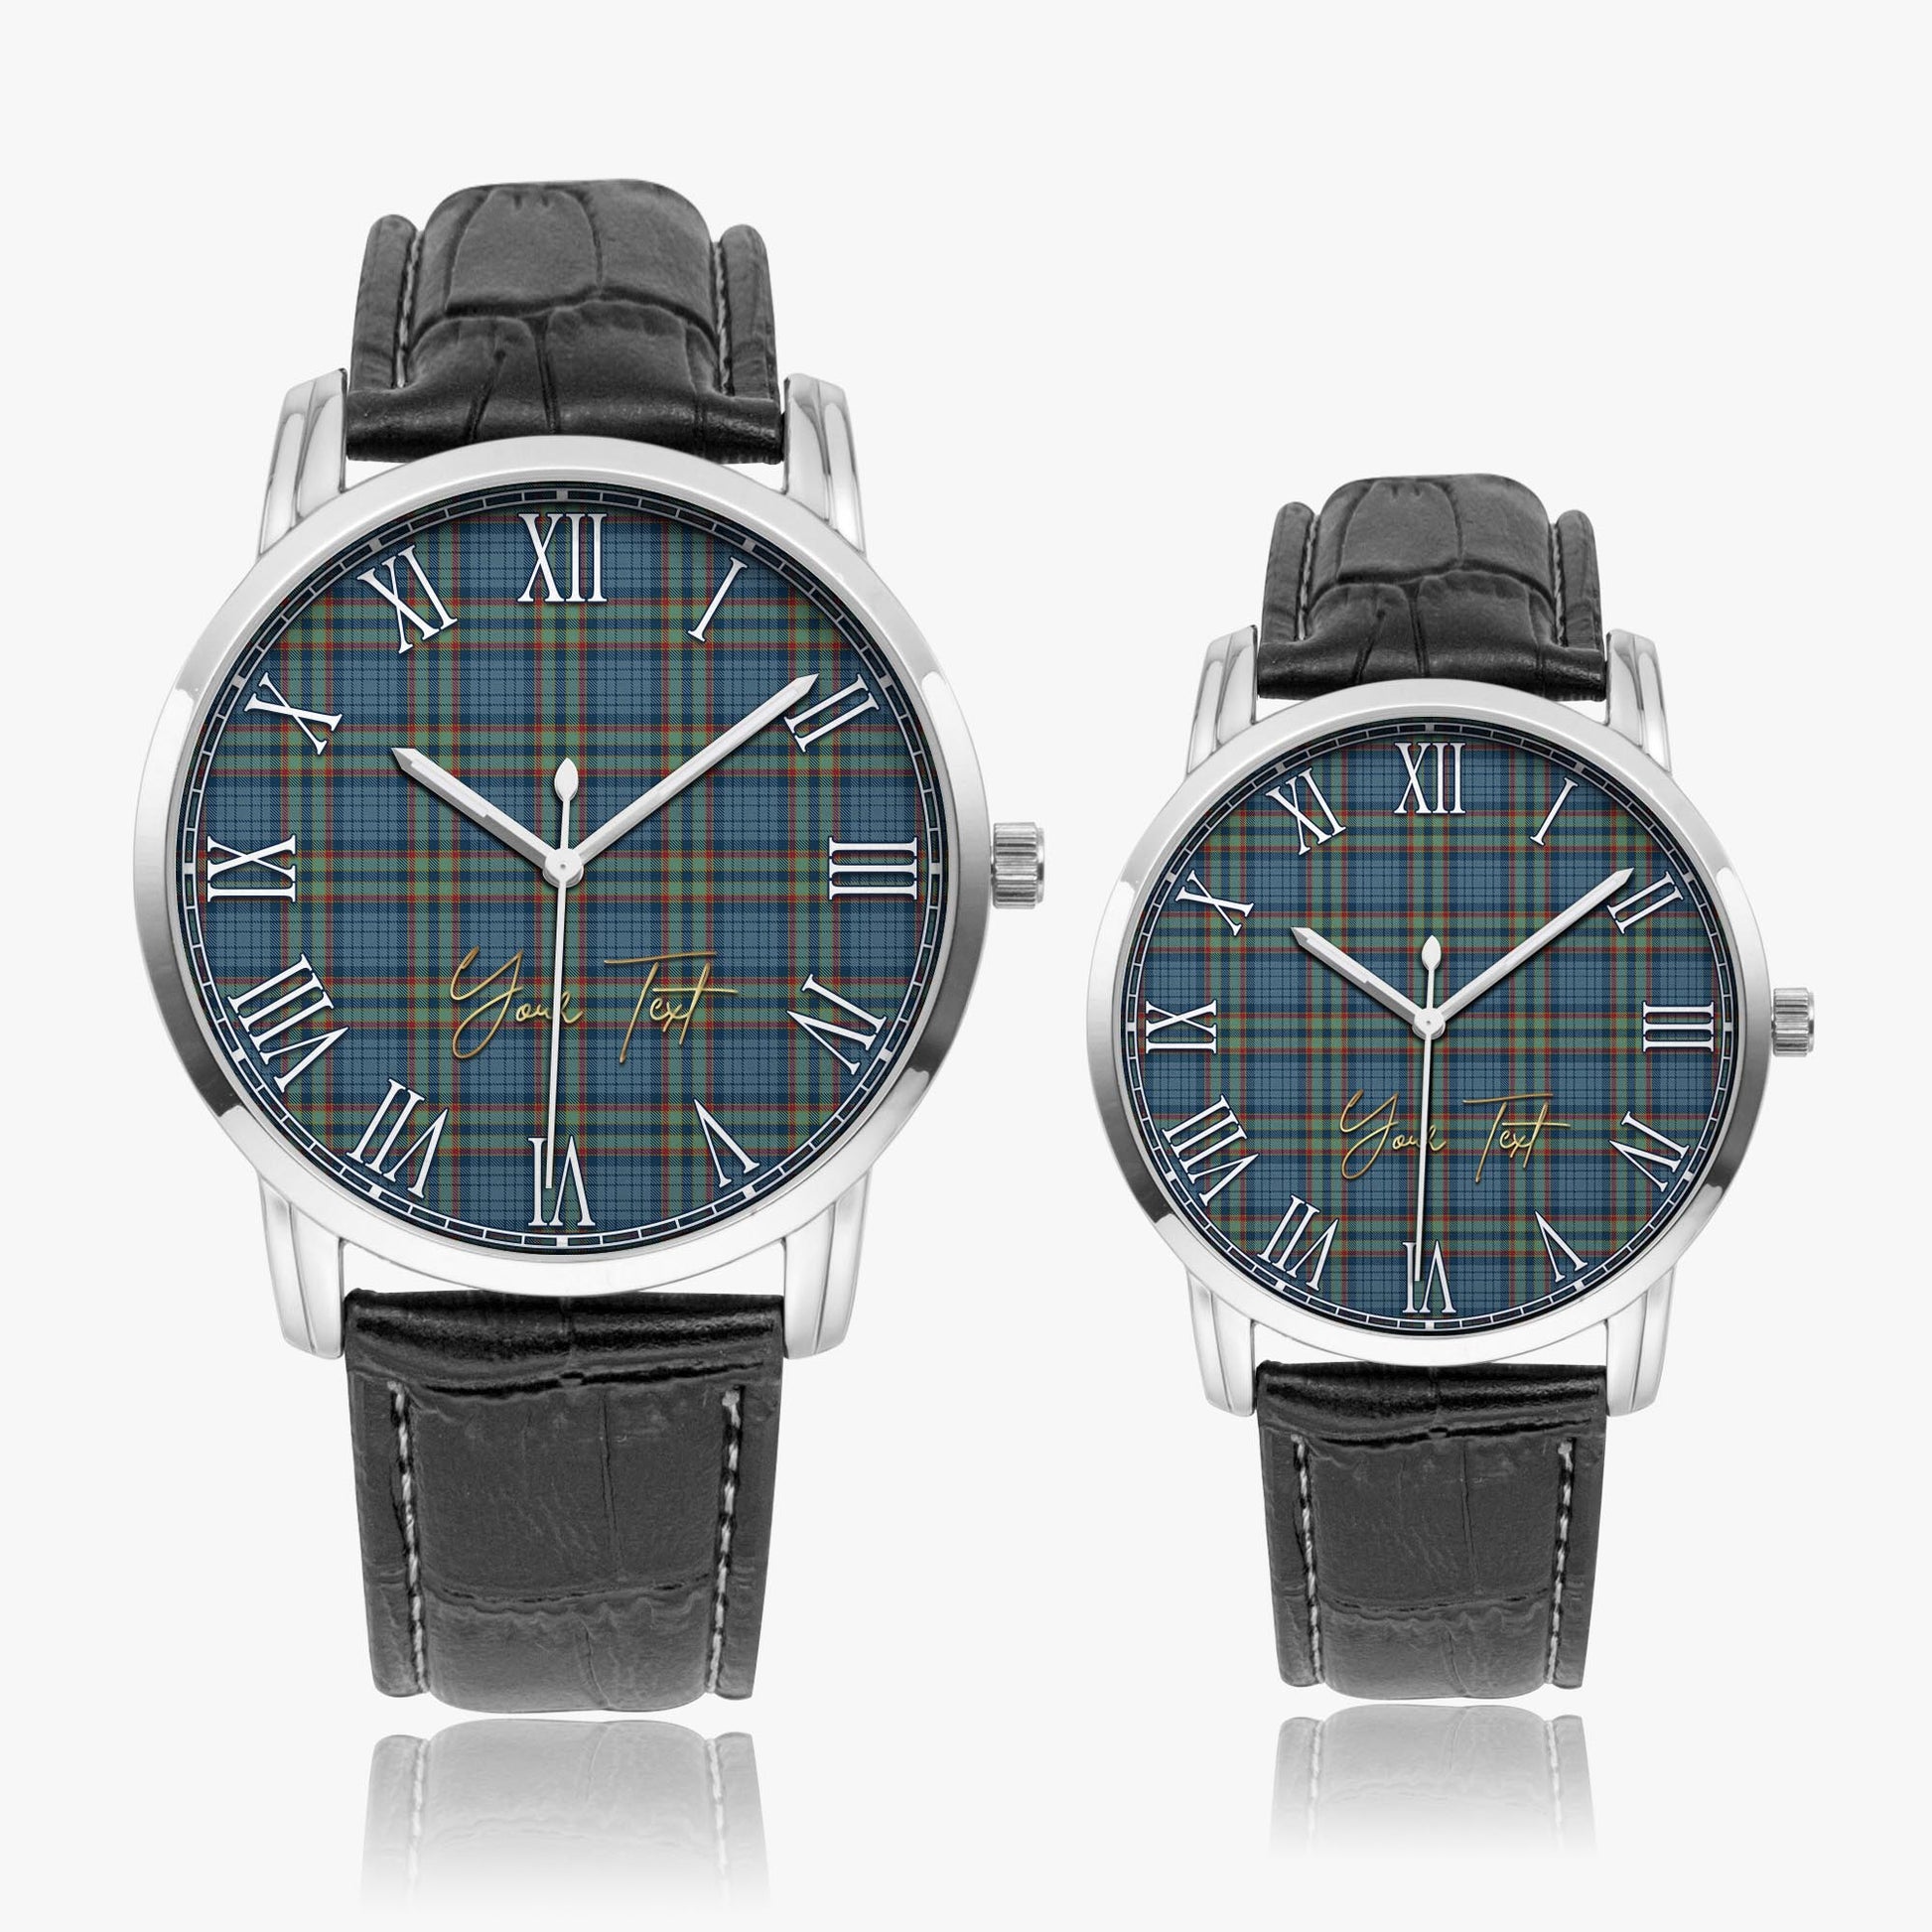 Ralston UK Tartan Personalized Your Text Leather Trap Quartz Watch Wide Type Silver Case With Black Leather Strap - Tartanvibesclothing